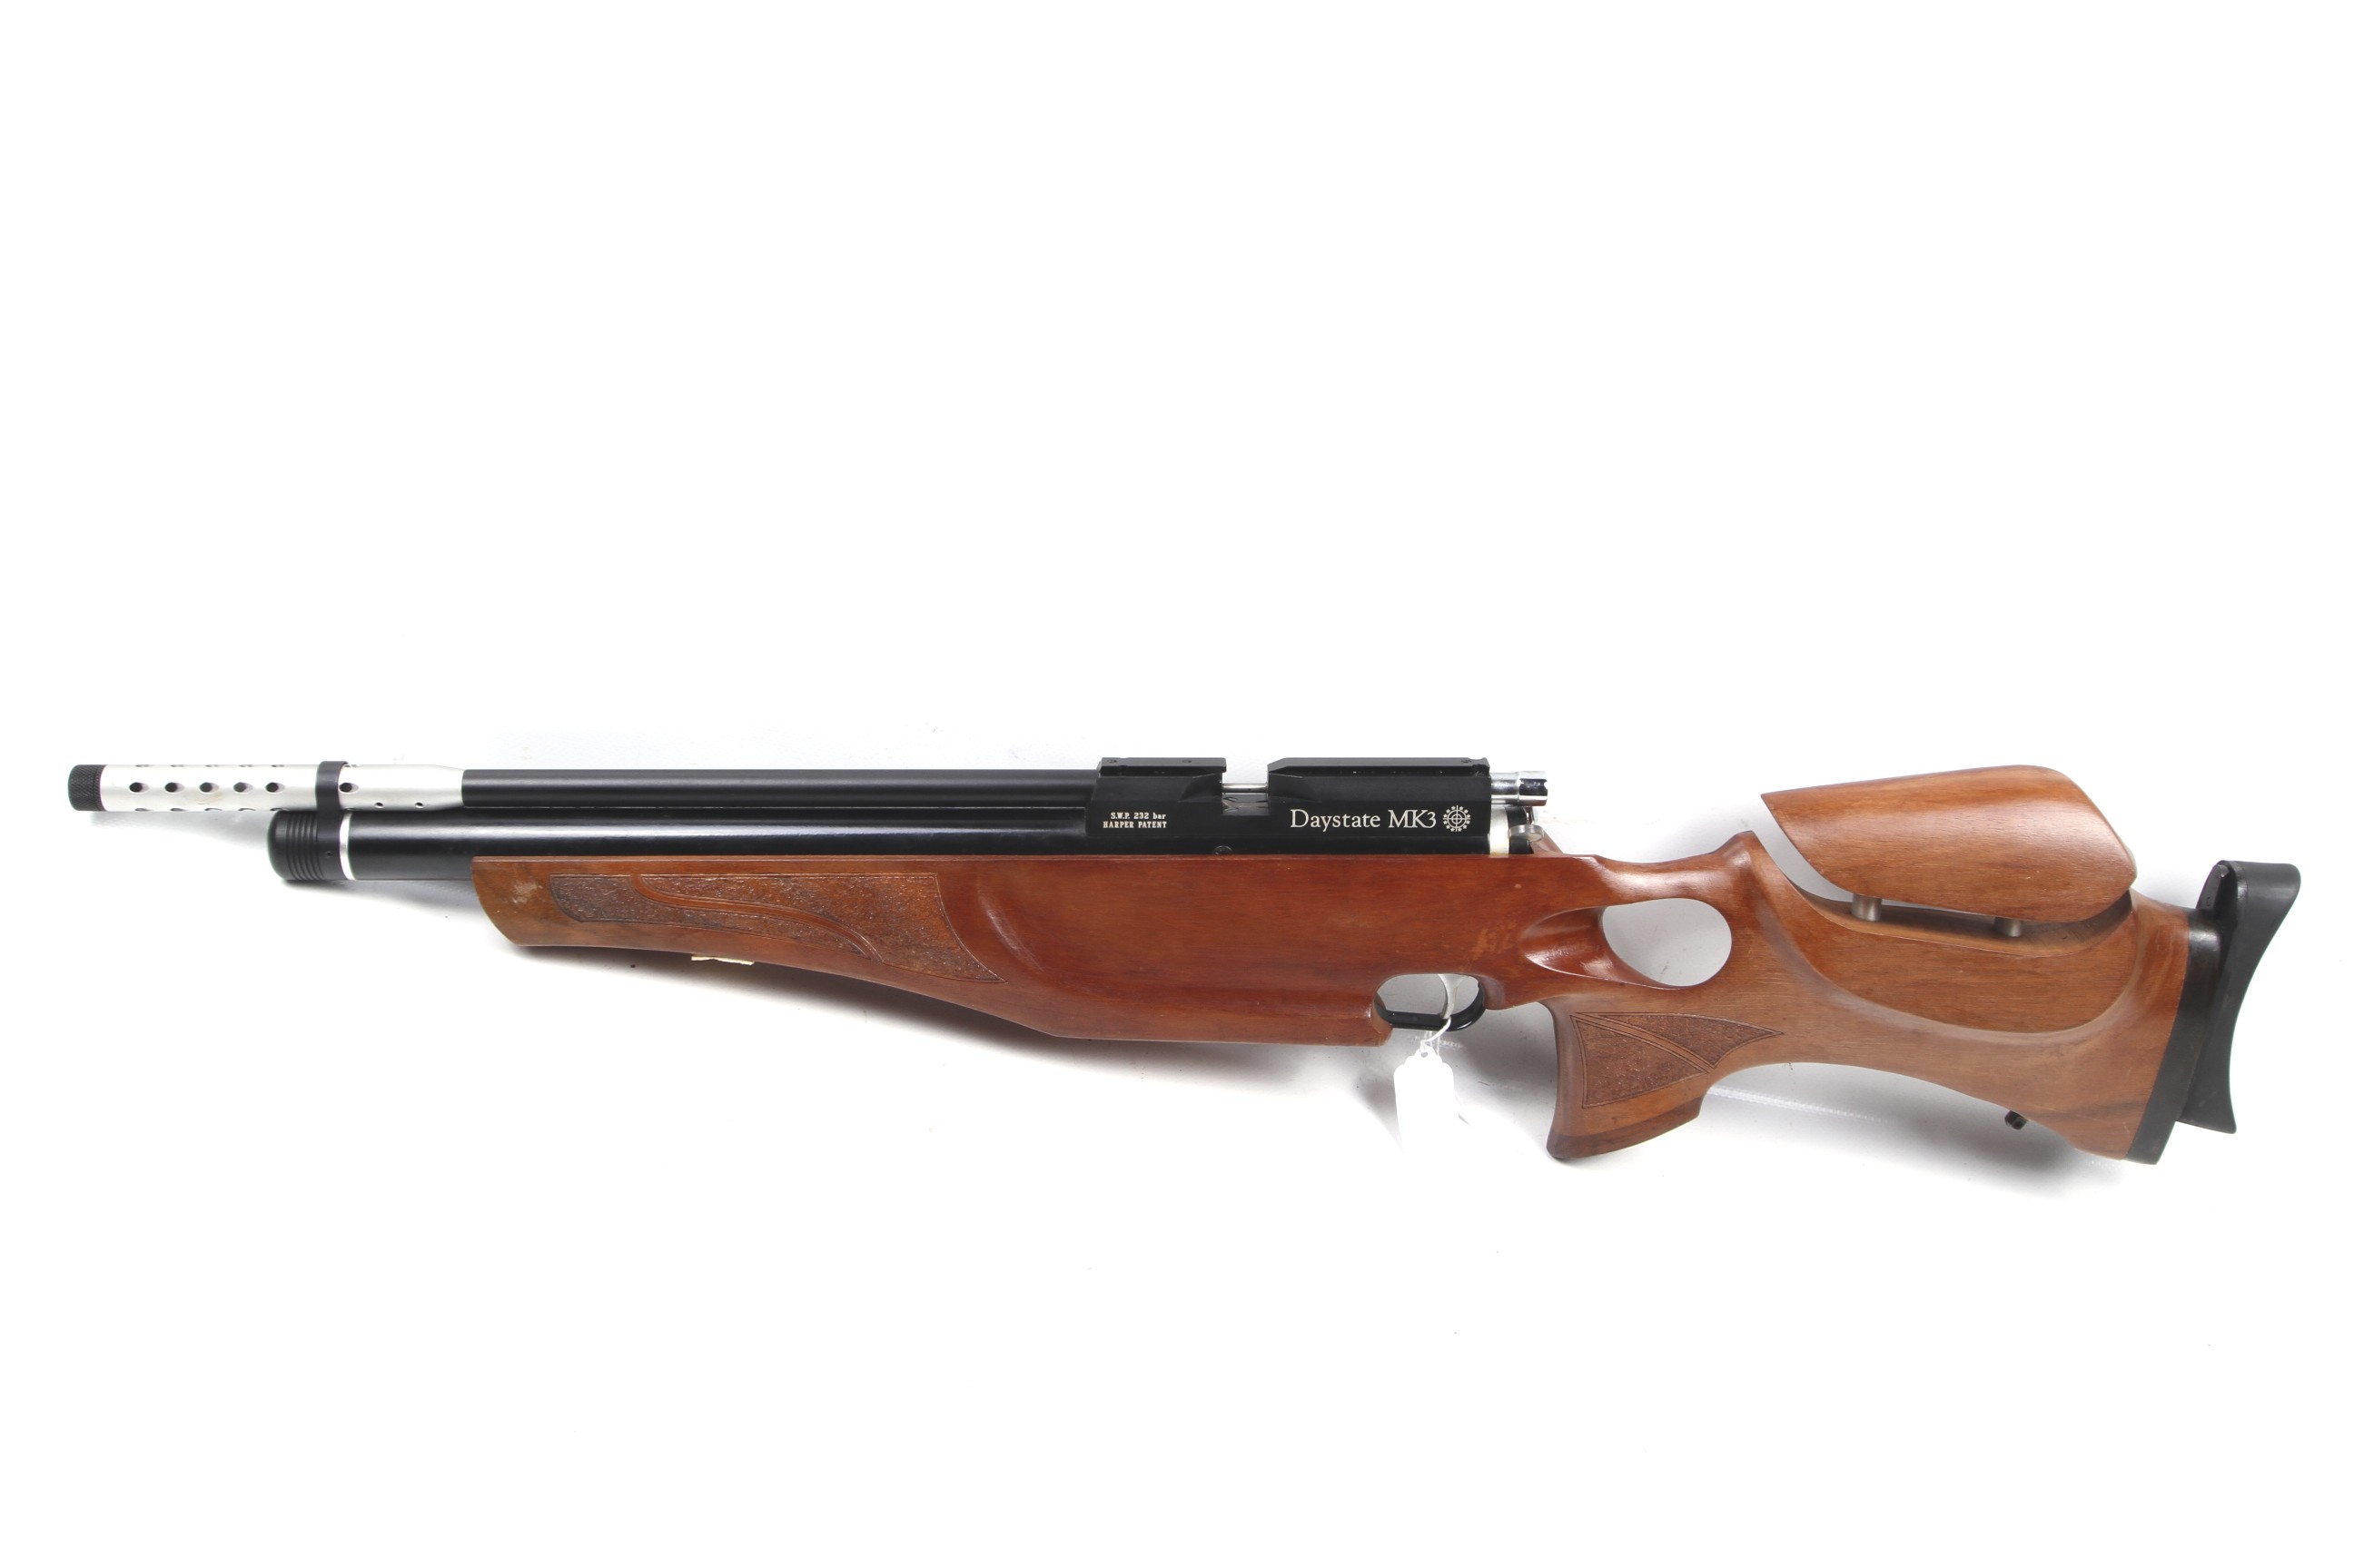 A Daystate mk 3 . PCP straight pull air rifle. - Image 2 of 4